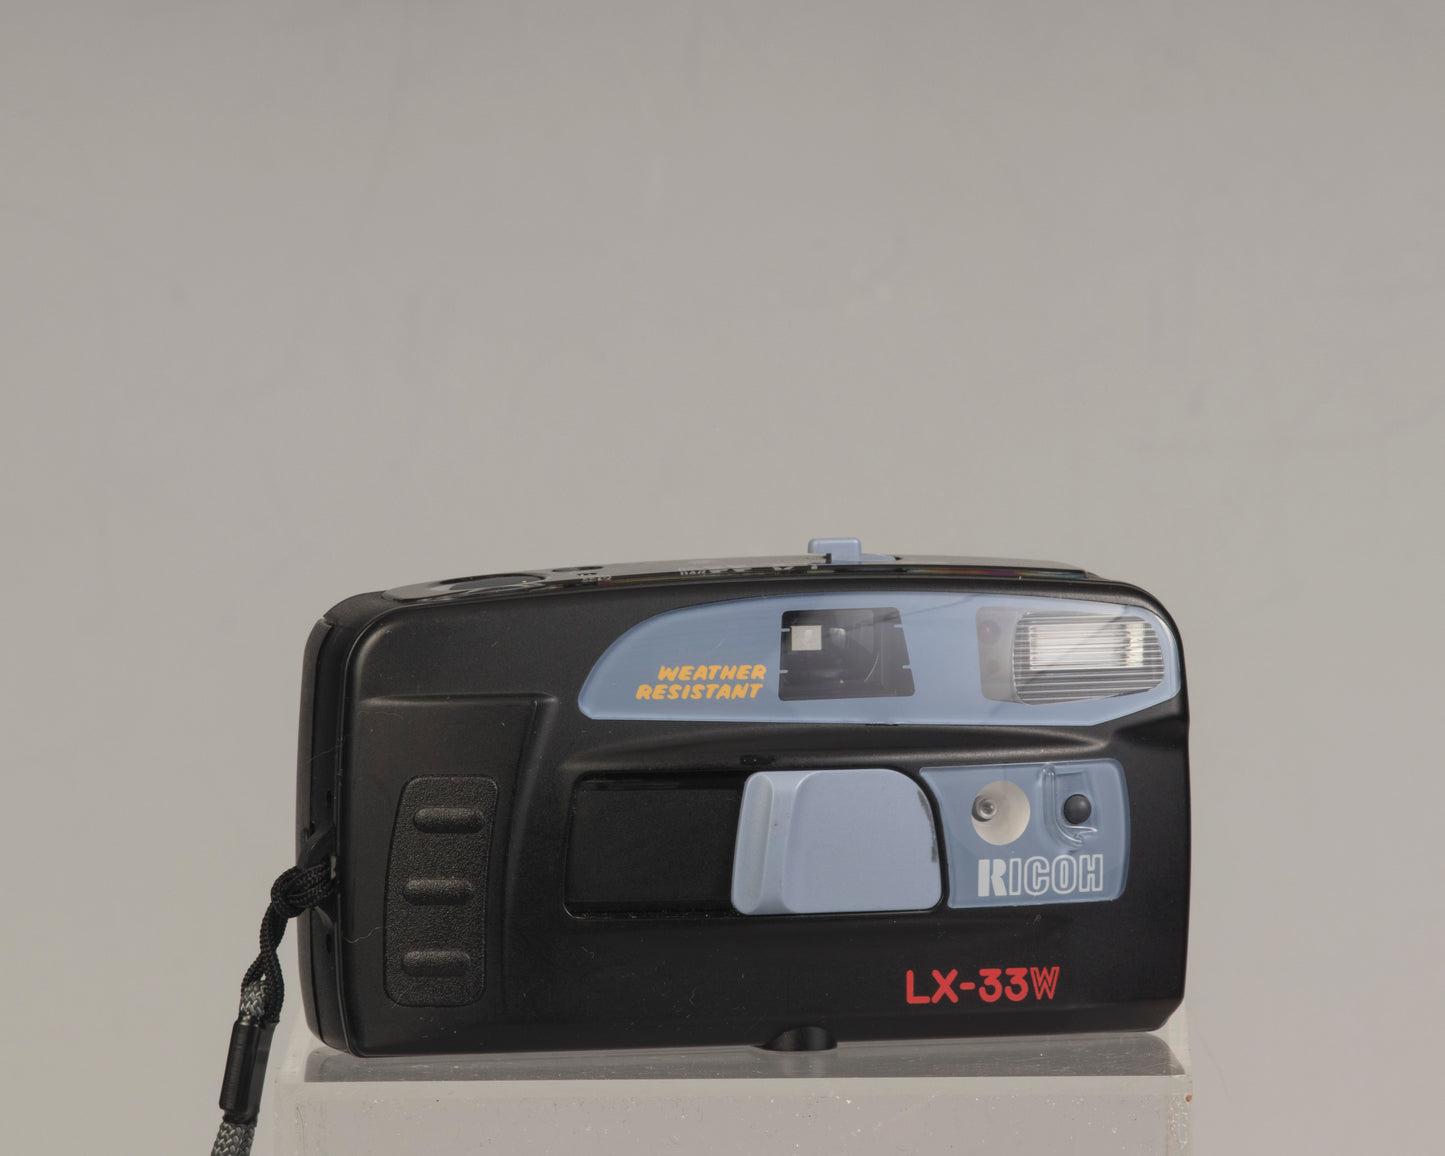 The Ricoh LX-33W is a simple weather-resistant 35mm film point-and-shoot camera from the 1990s